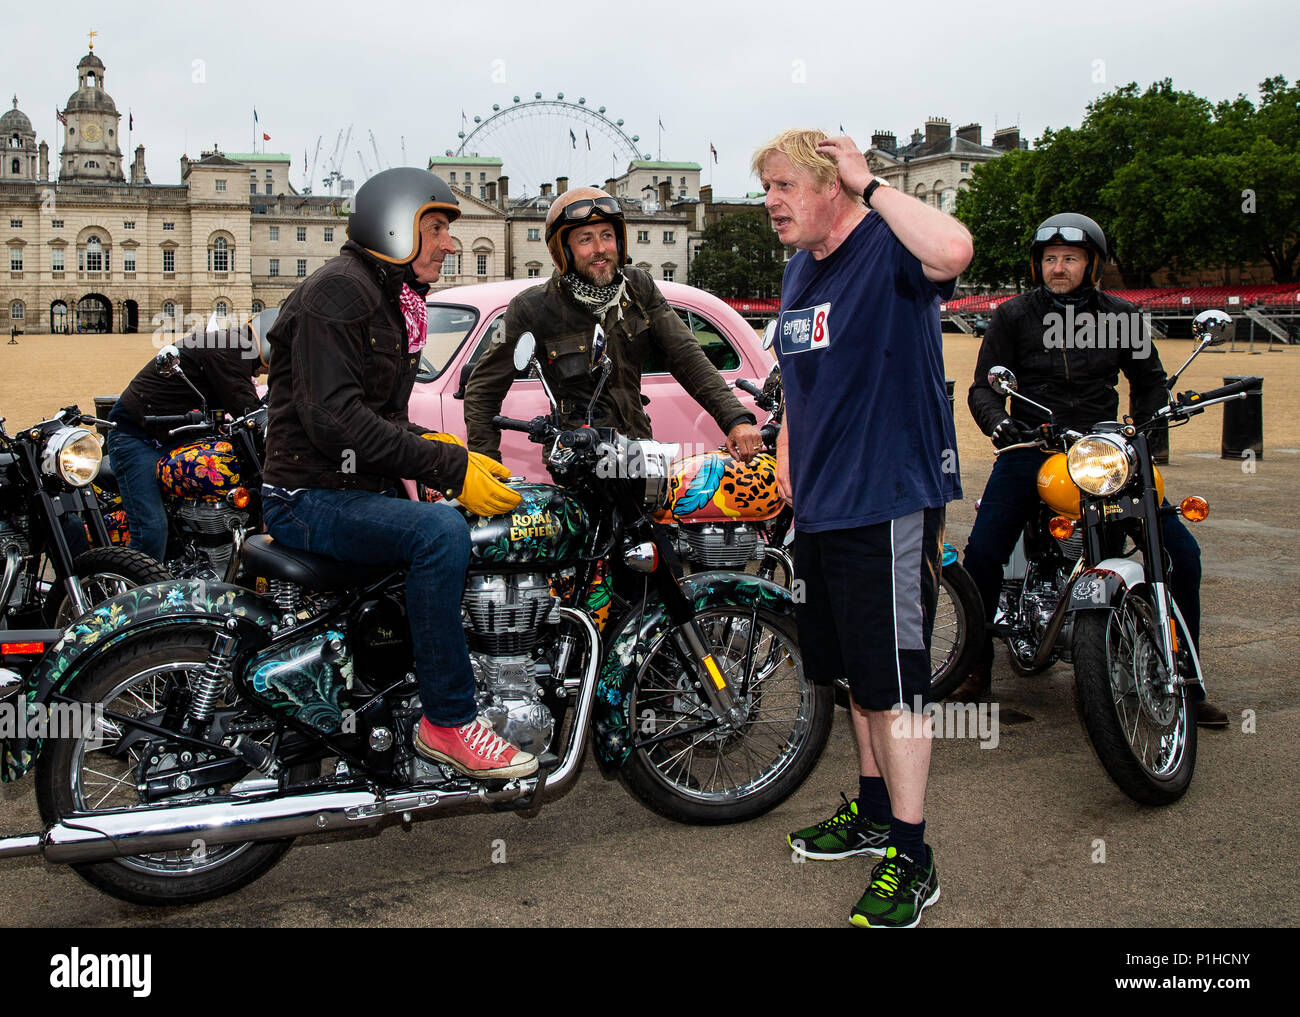 Boris Johnson, Secretary of State for Foreign Affairs chats to Simon de Burton on the House of Hackney bike and Sam Pelly on the Boyarde bike while on Elephant Family's â€˜Concours d'elephant' outside Horse Guards during the photocall in London. PRESS ASSOCIATION Photo. Picture date: Tuesday June 12, 2018. A customised fleet of 12 Ambassador cars, eight Royal Enfield motorbikes, a tuk tuk and a Gujarati Chagda made up the â€˜Concours d'elephant' - a cavalcade of designer inspired, quintessentially Indian vehicles - while thirty beautifully decorated elephant sculptures will stand senti Stock Photo